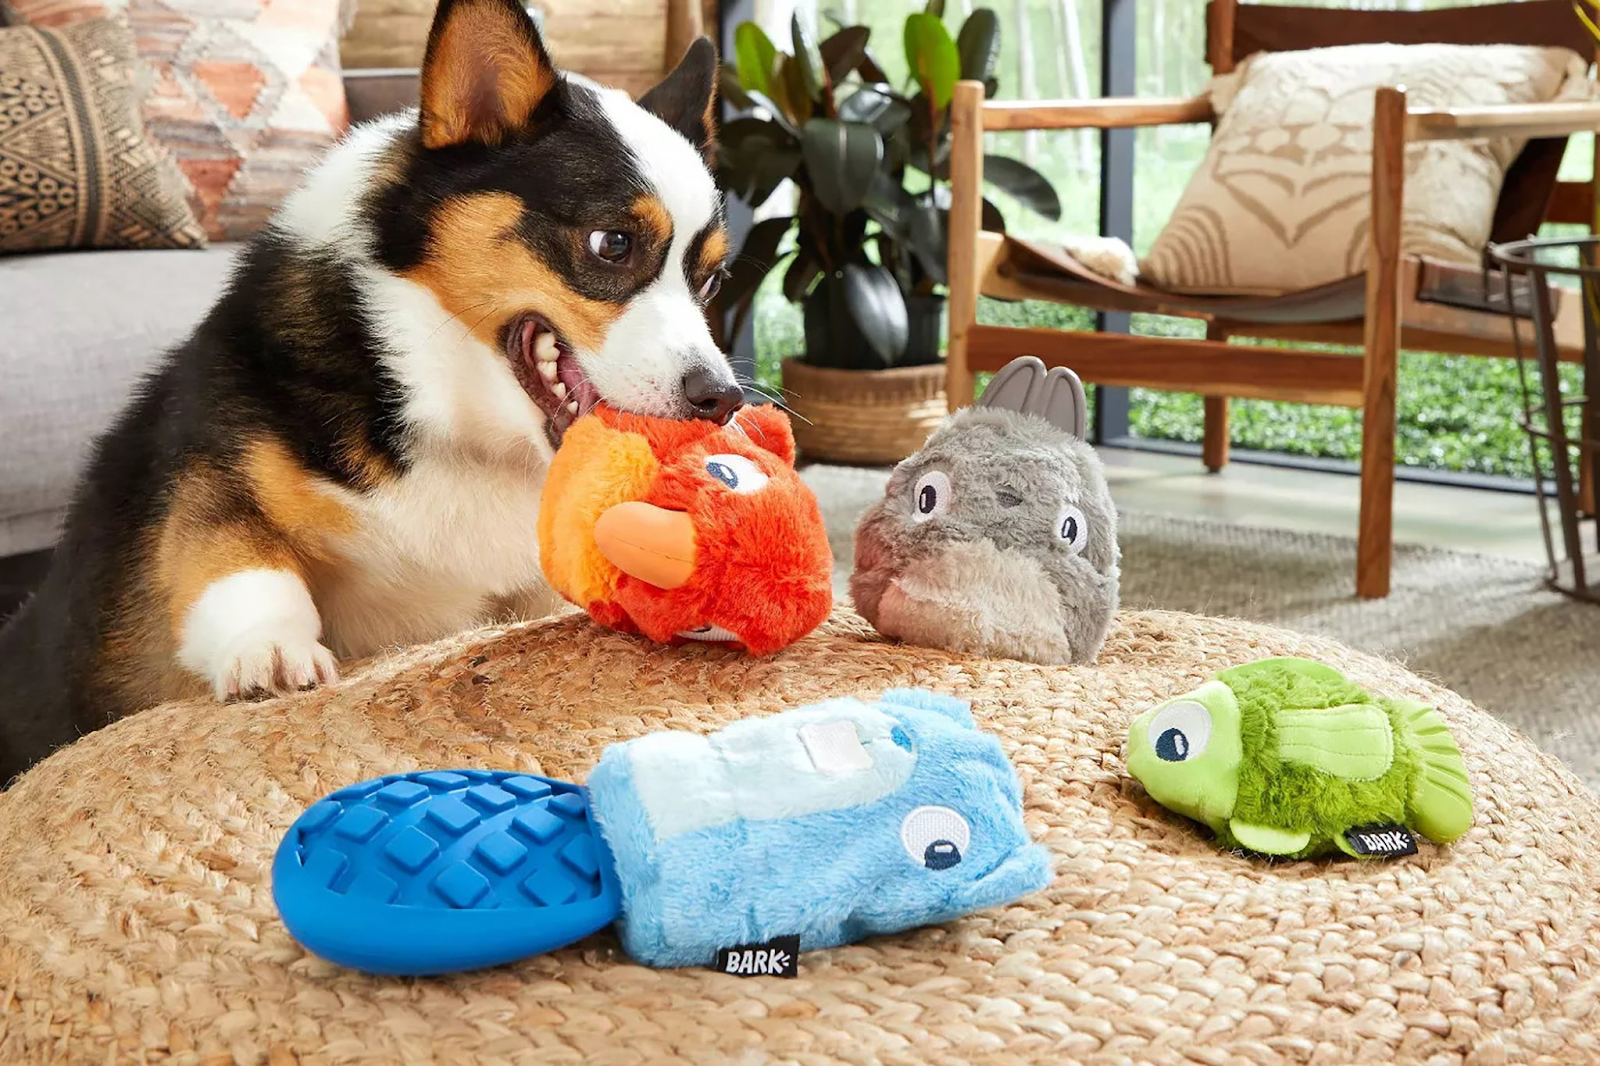 An example of dog toy advertising